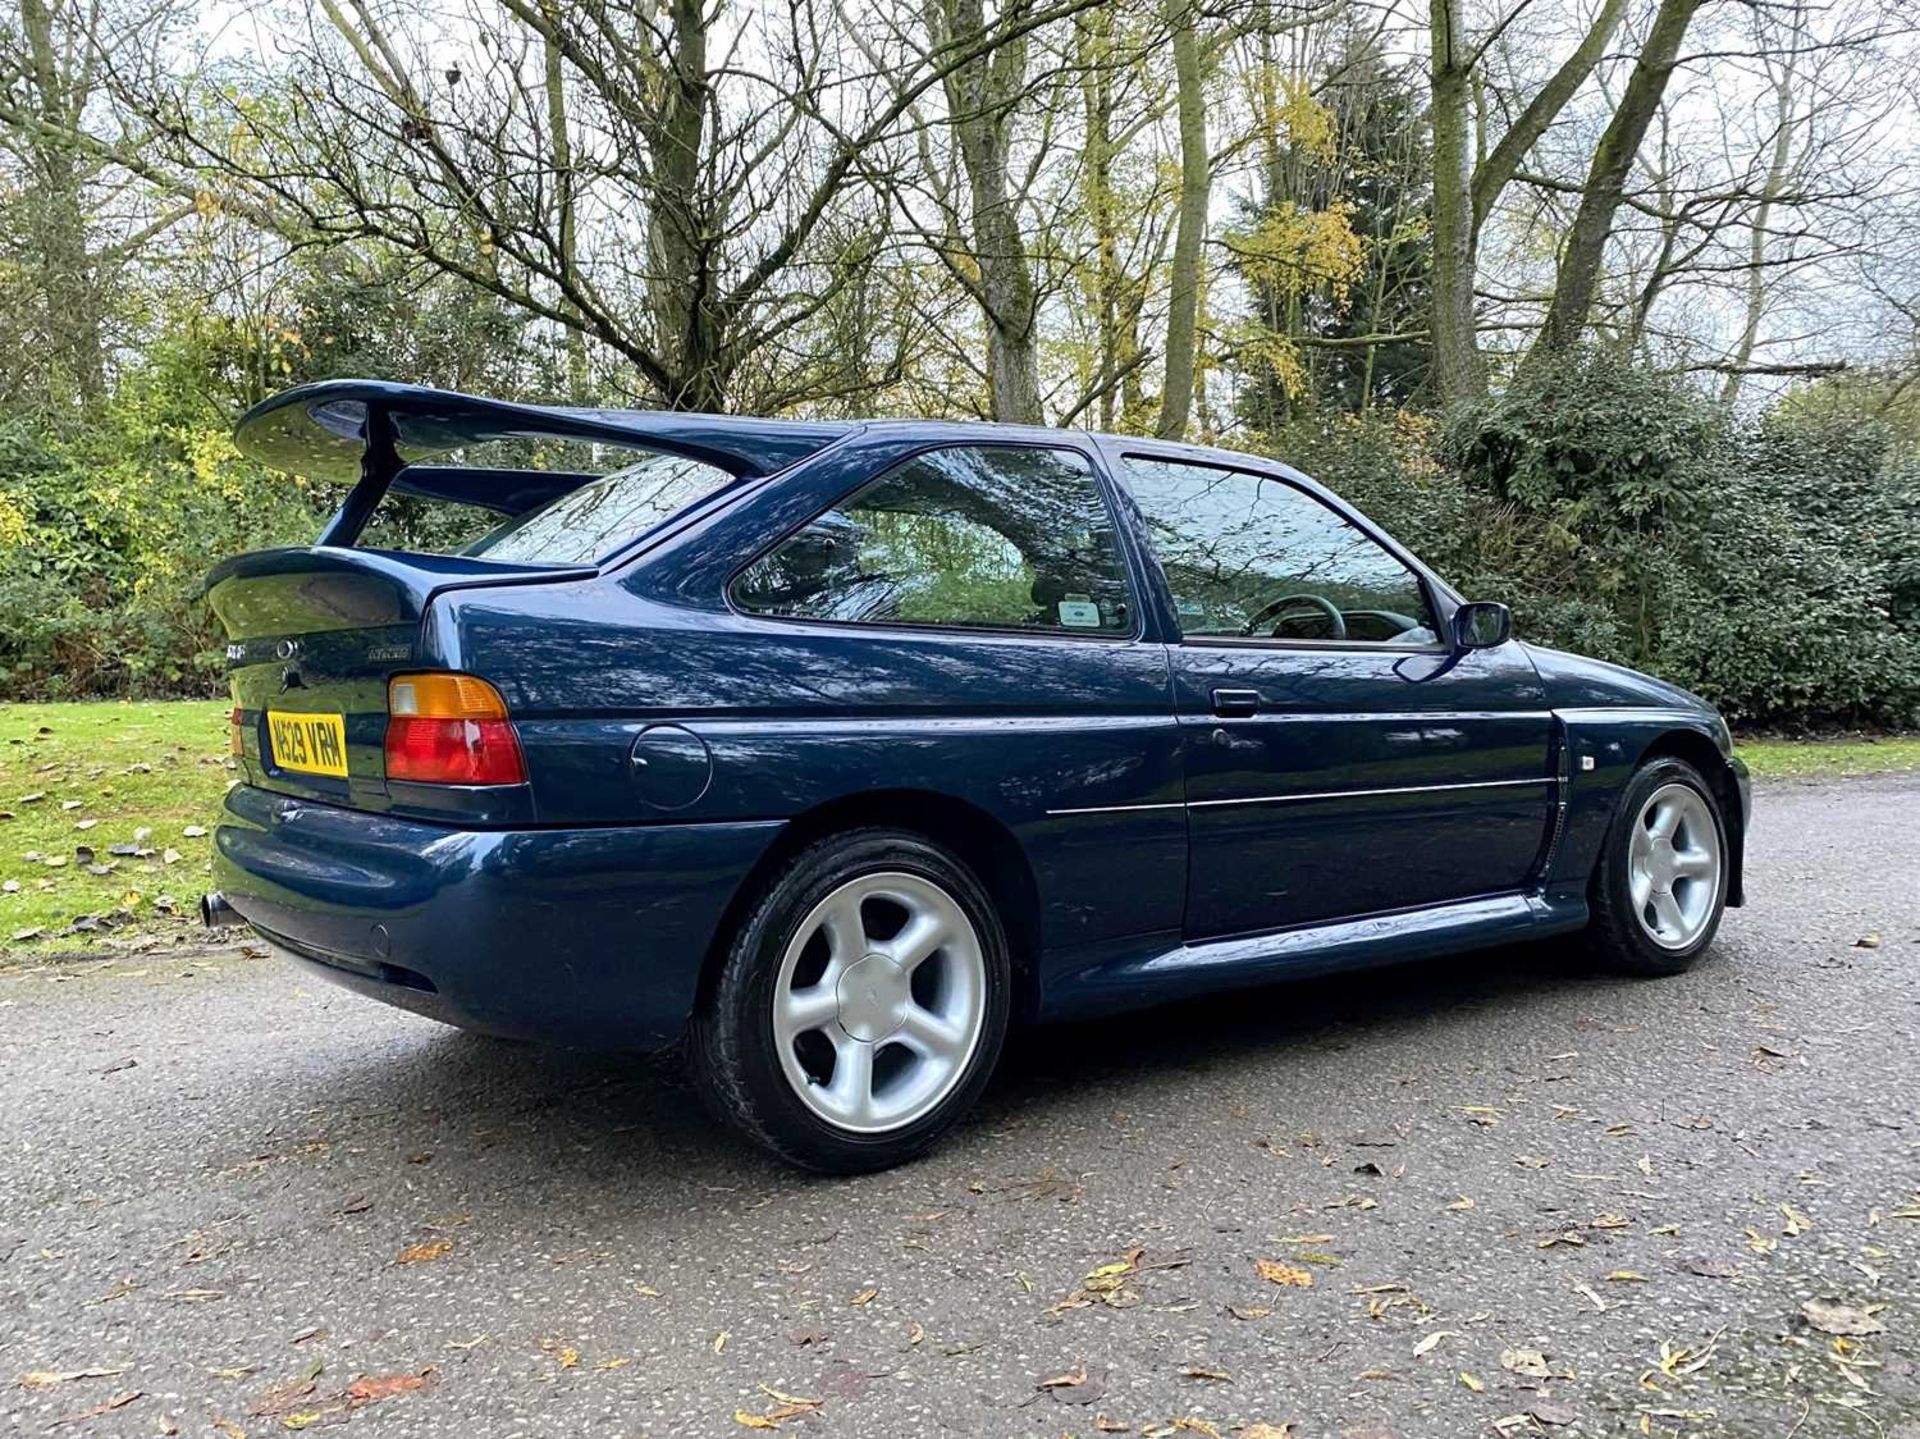 1995 Ford Escort RS Cosworth LUX Only 56,000 miles, finished in rare Petrol Blue - Image 24 of 98